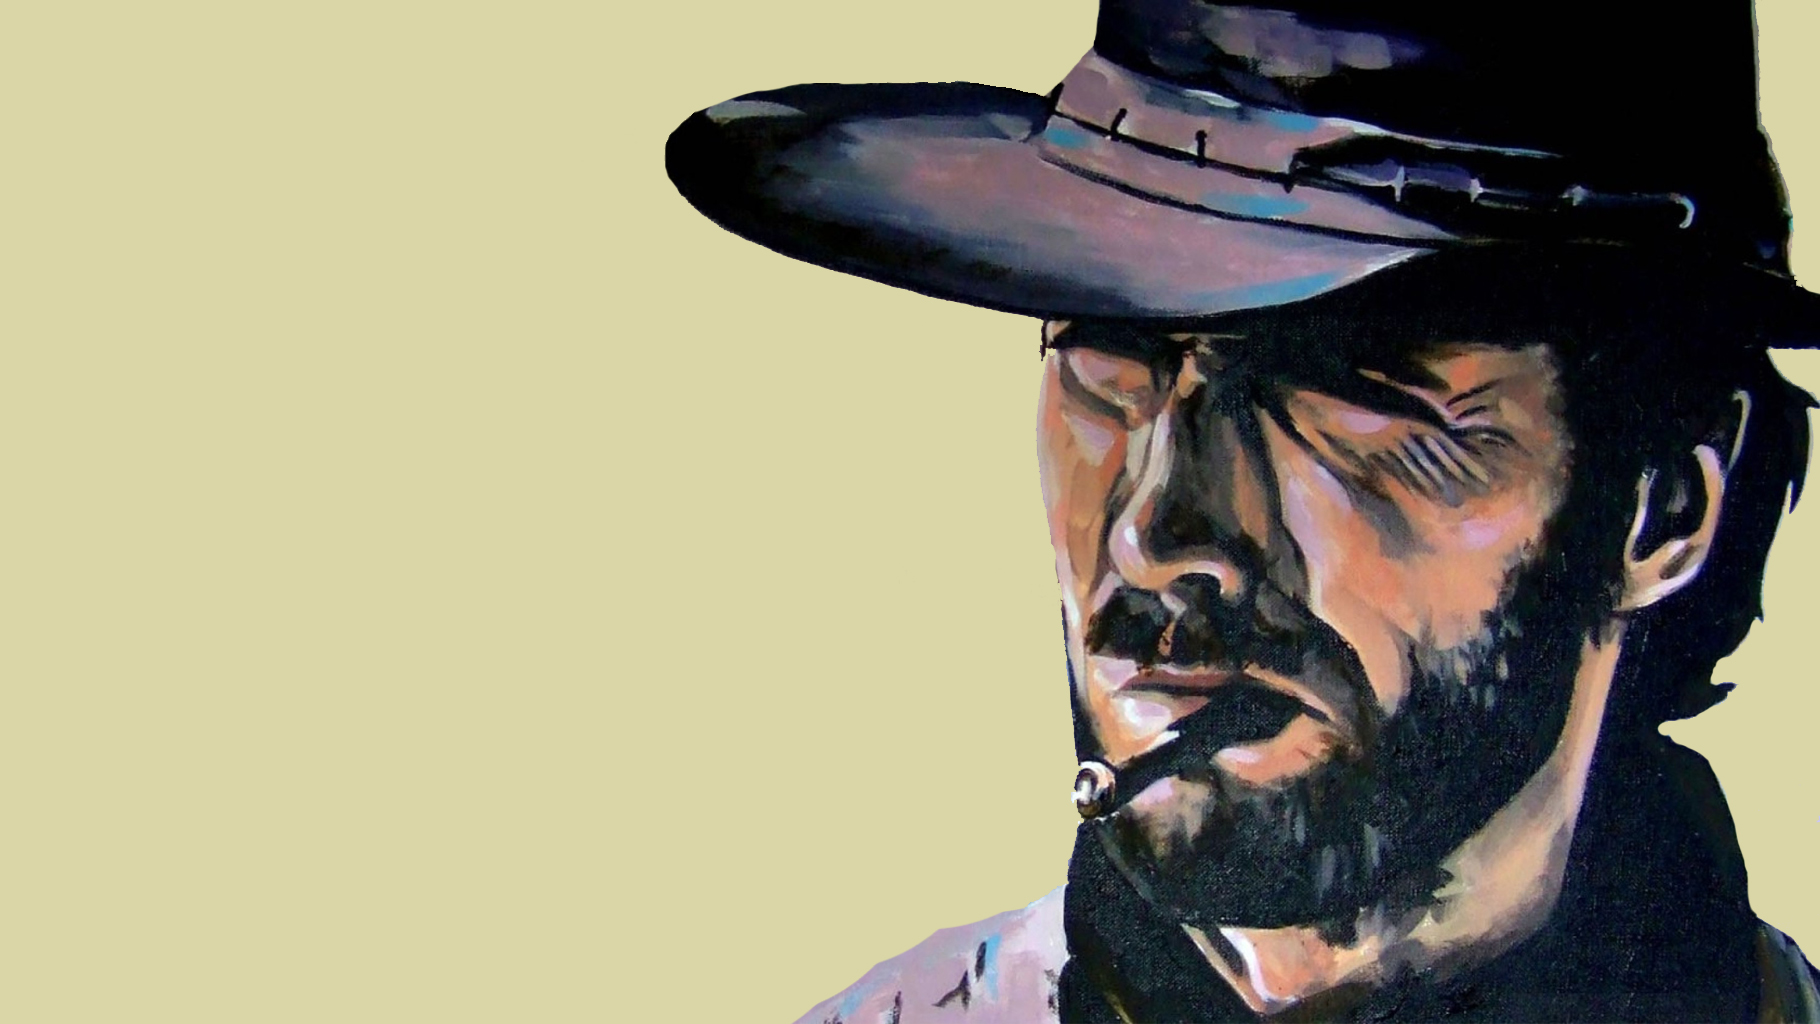 Download Clint Eastwood Cowboy Squinting Eyes Wallpaper | Wallpapers.com